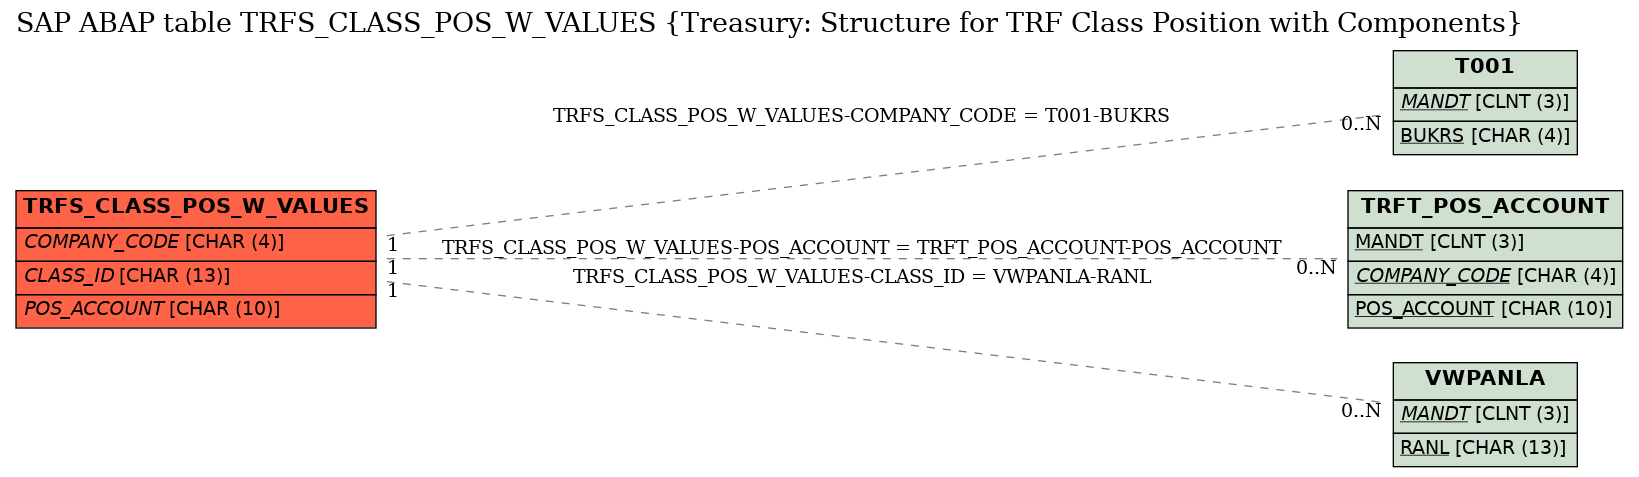 E-R Diagram for table TRFS_CLASS_POS_W_VALUES (Treasury: Structure for TRF Class Position with Components)